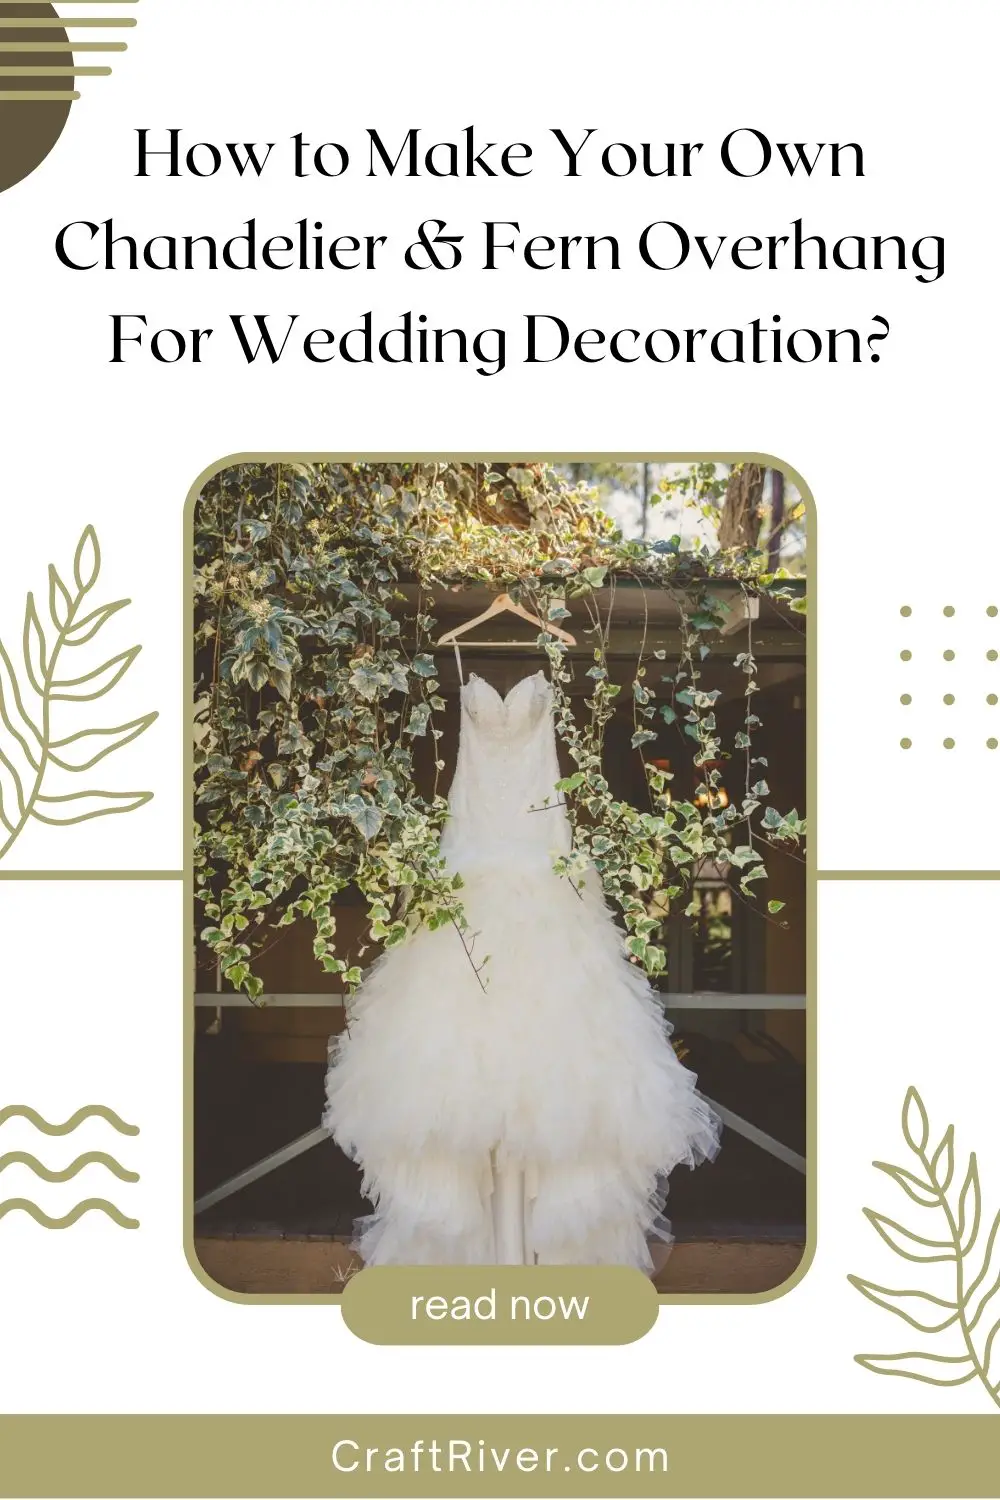 How to Make Your Own Chandelier & Fern Overhang For Wedding Decoration